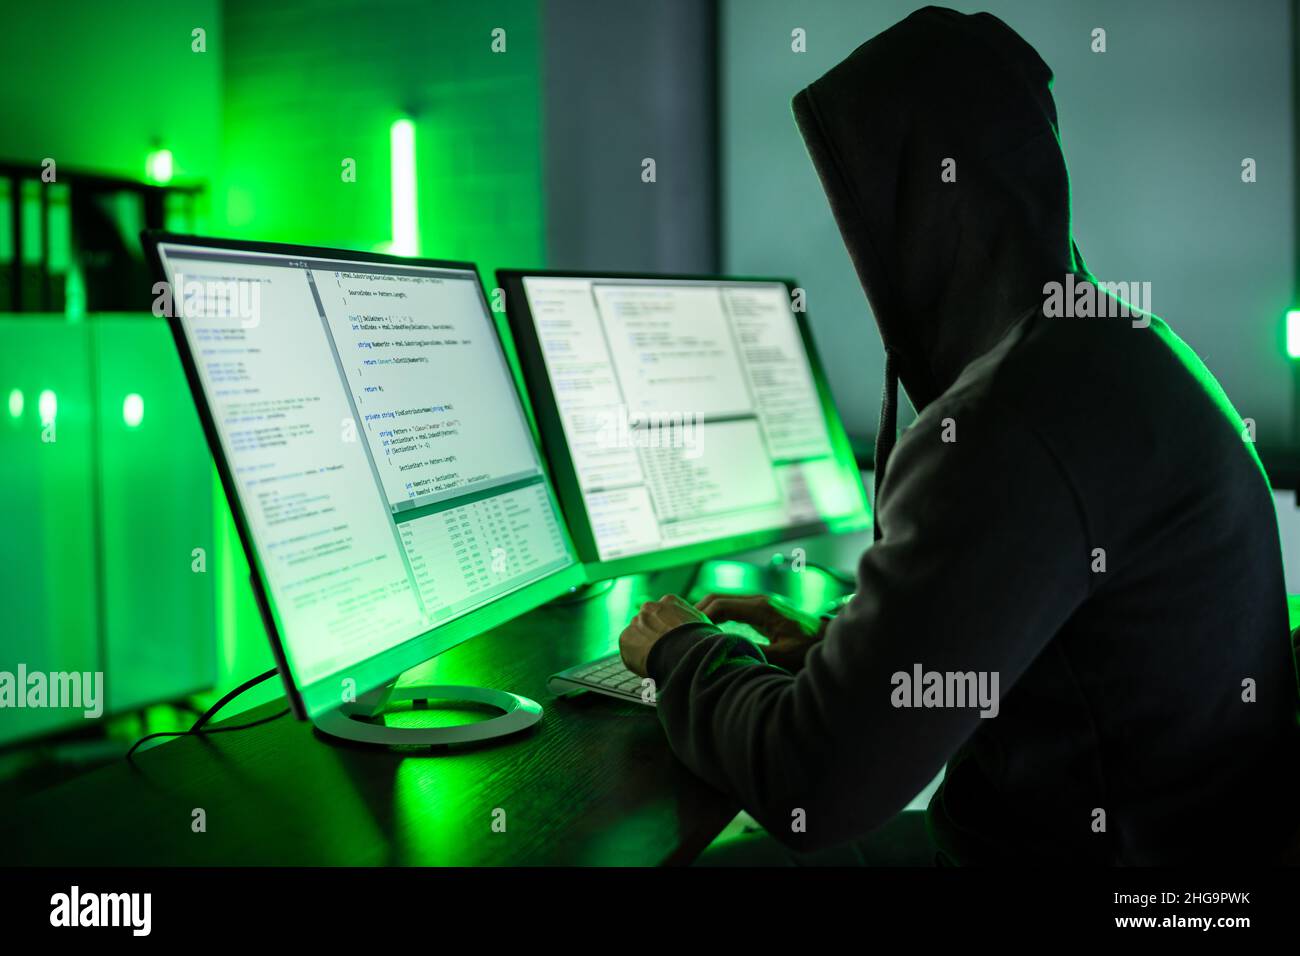 Cyber Security Data Breach And Hacking Crime Stock Photo